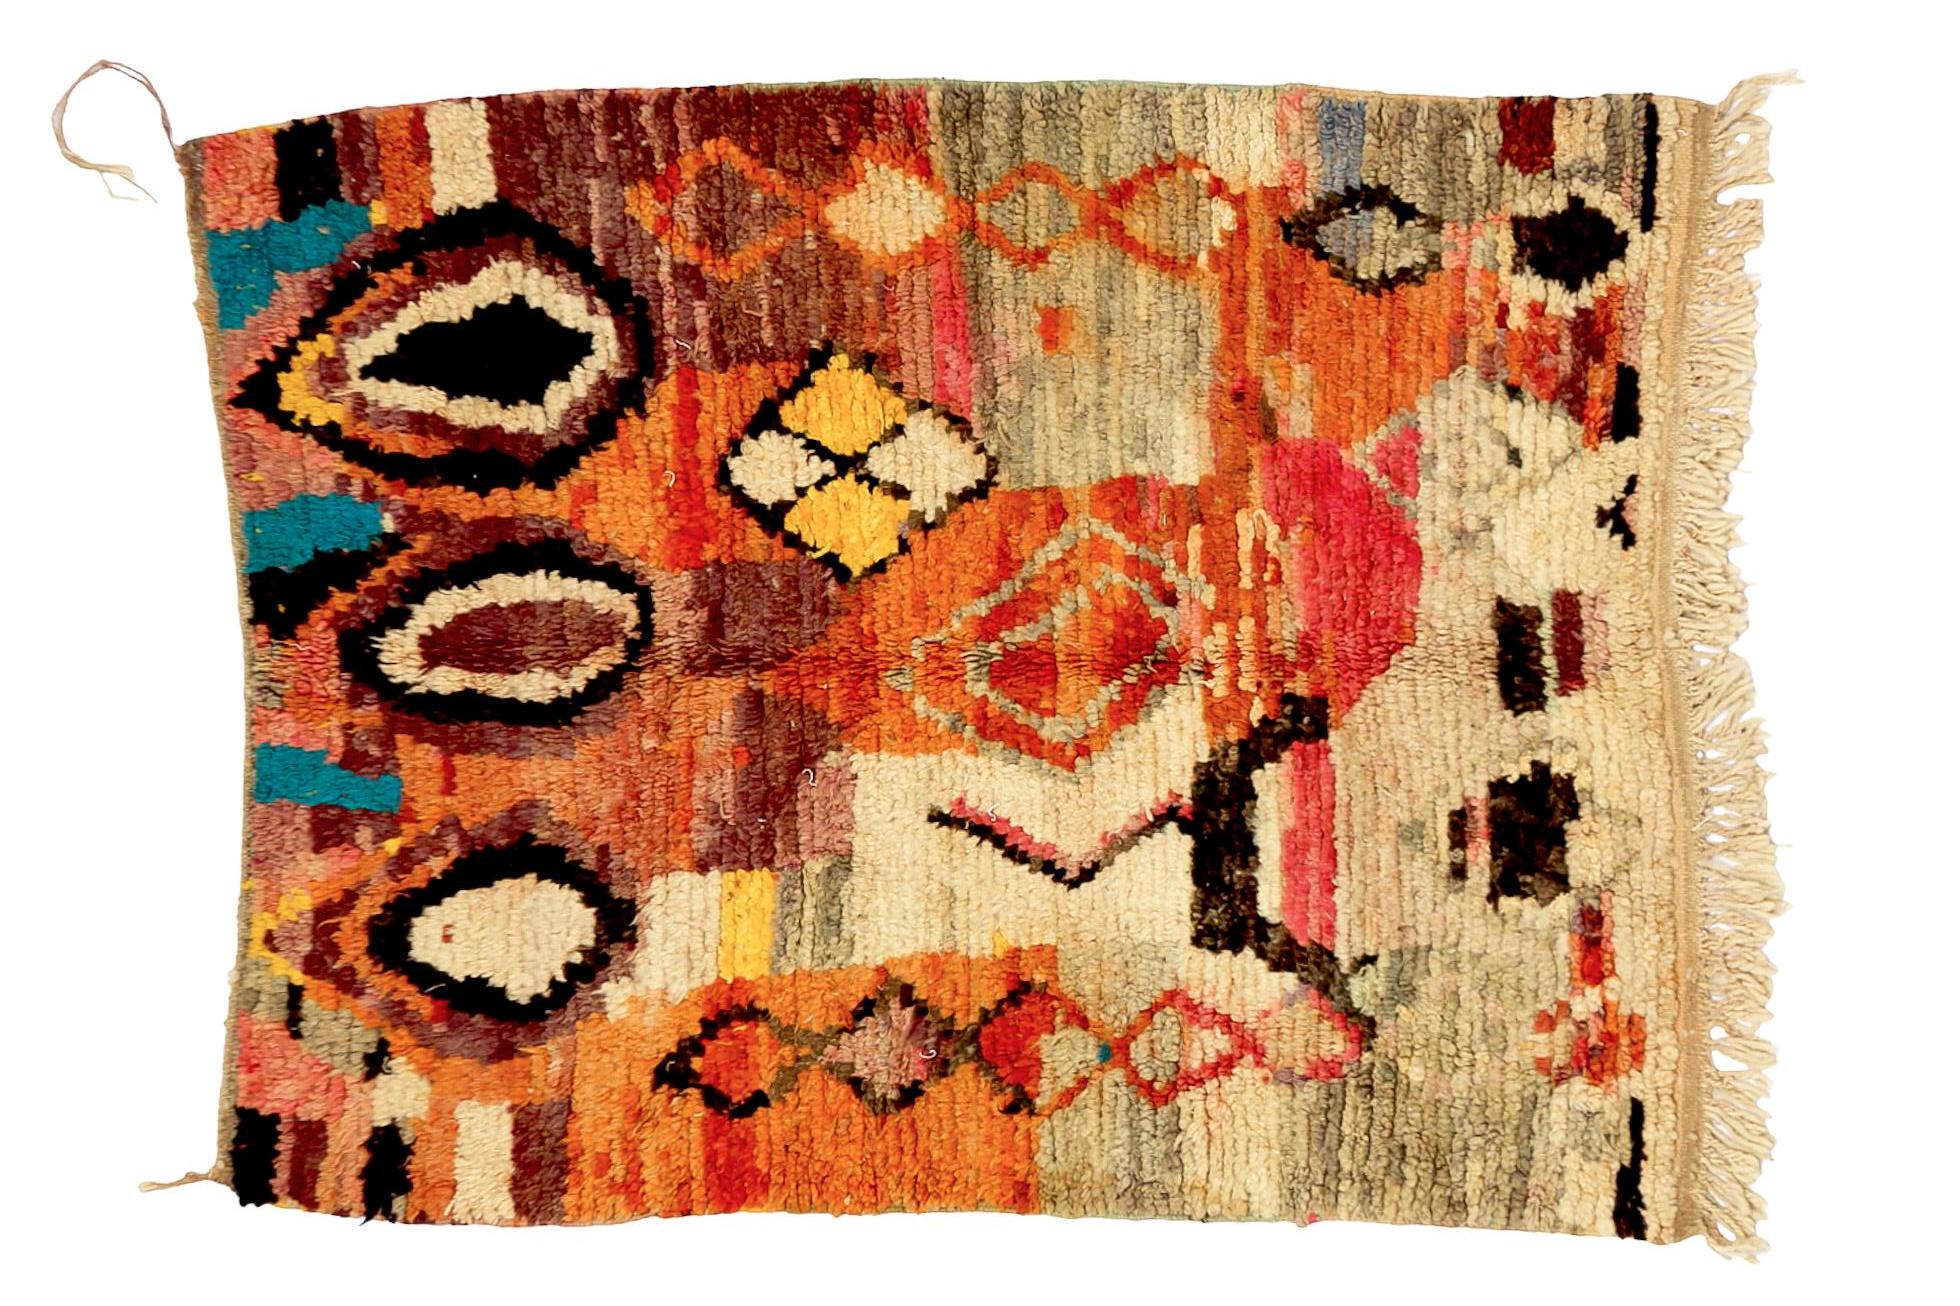 Boujaad rug comes from the El Haouz region in the Middle Atlas in Morocco. There is no modern weaving equipment, carpets are made manually by very talented ladies artists in the same way as several centuries ago. The main feature of Boujaad is the